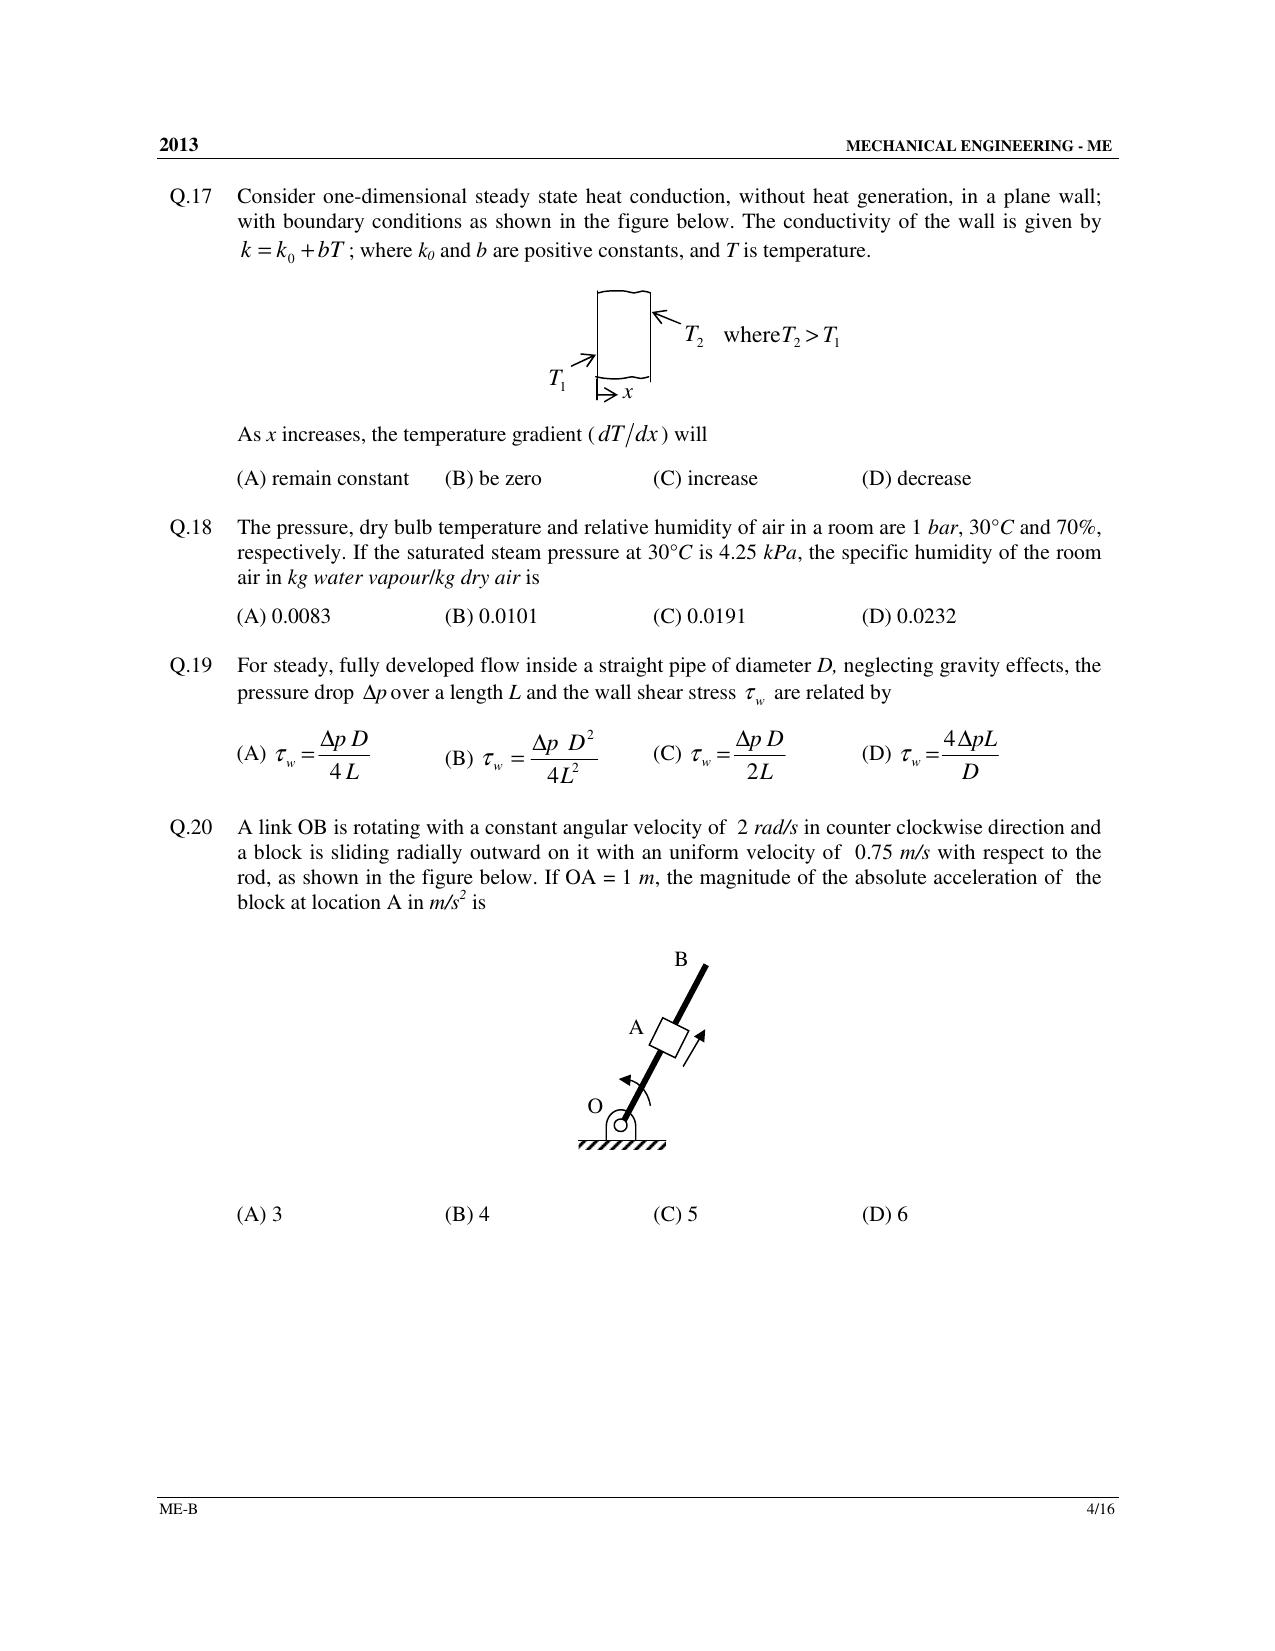 GATE 2013 Mechanical Engineering (ME) Question Paper with Answer Key - Page 19